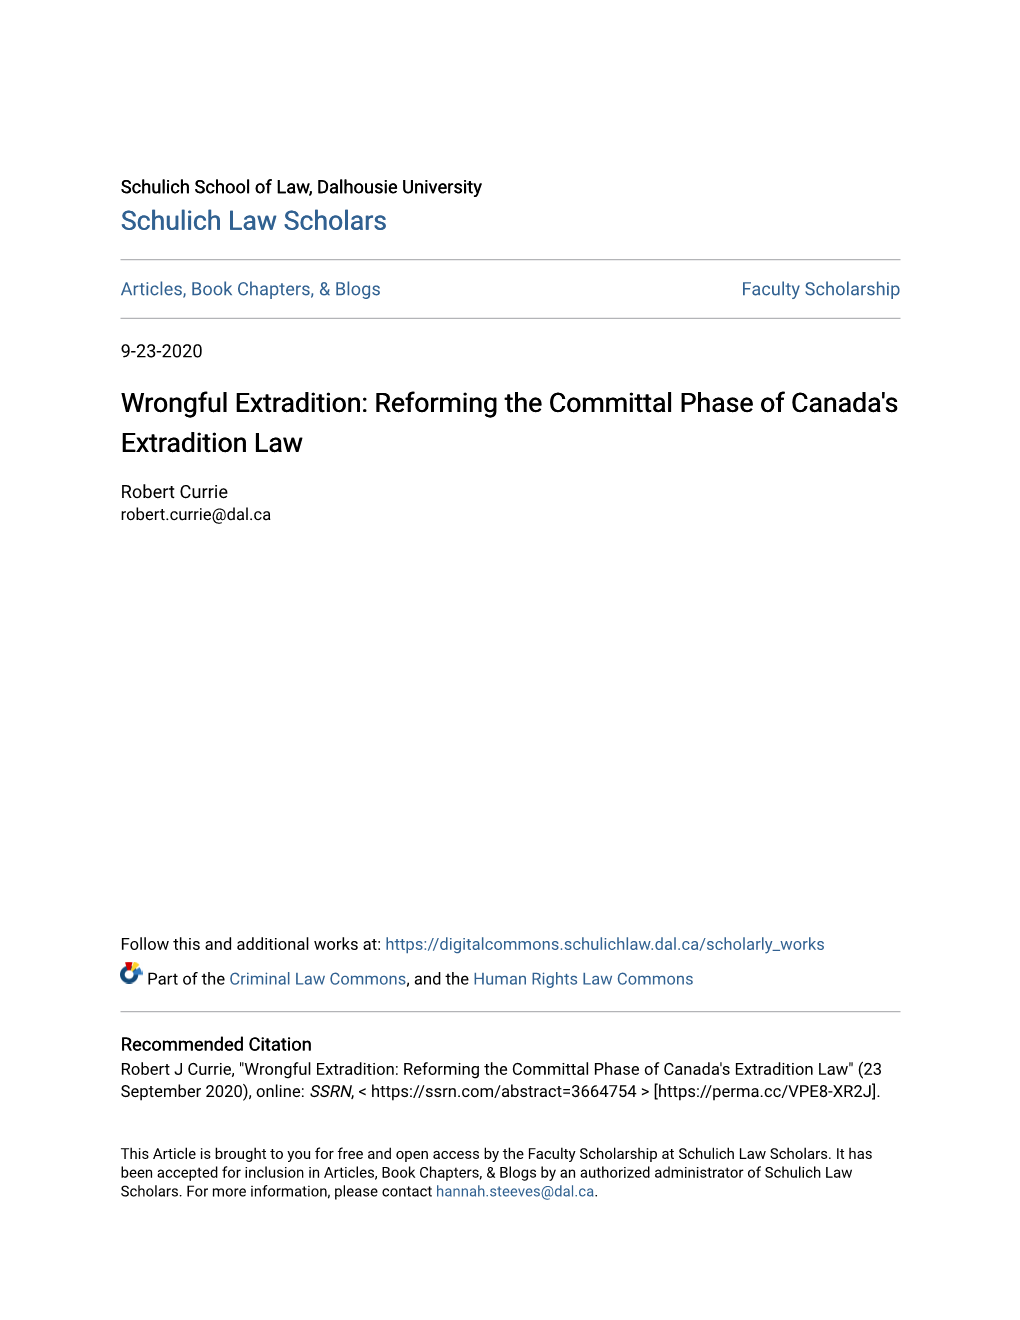 Wrongful Extradition: Reforming the Committal Phase of Canada's Extradition Law